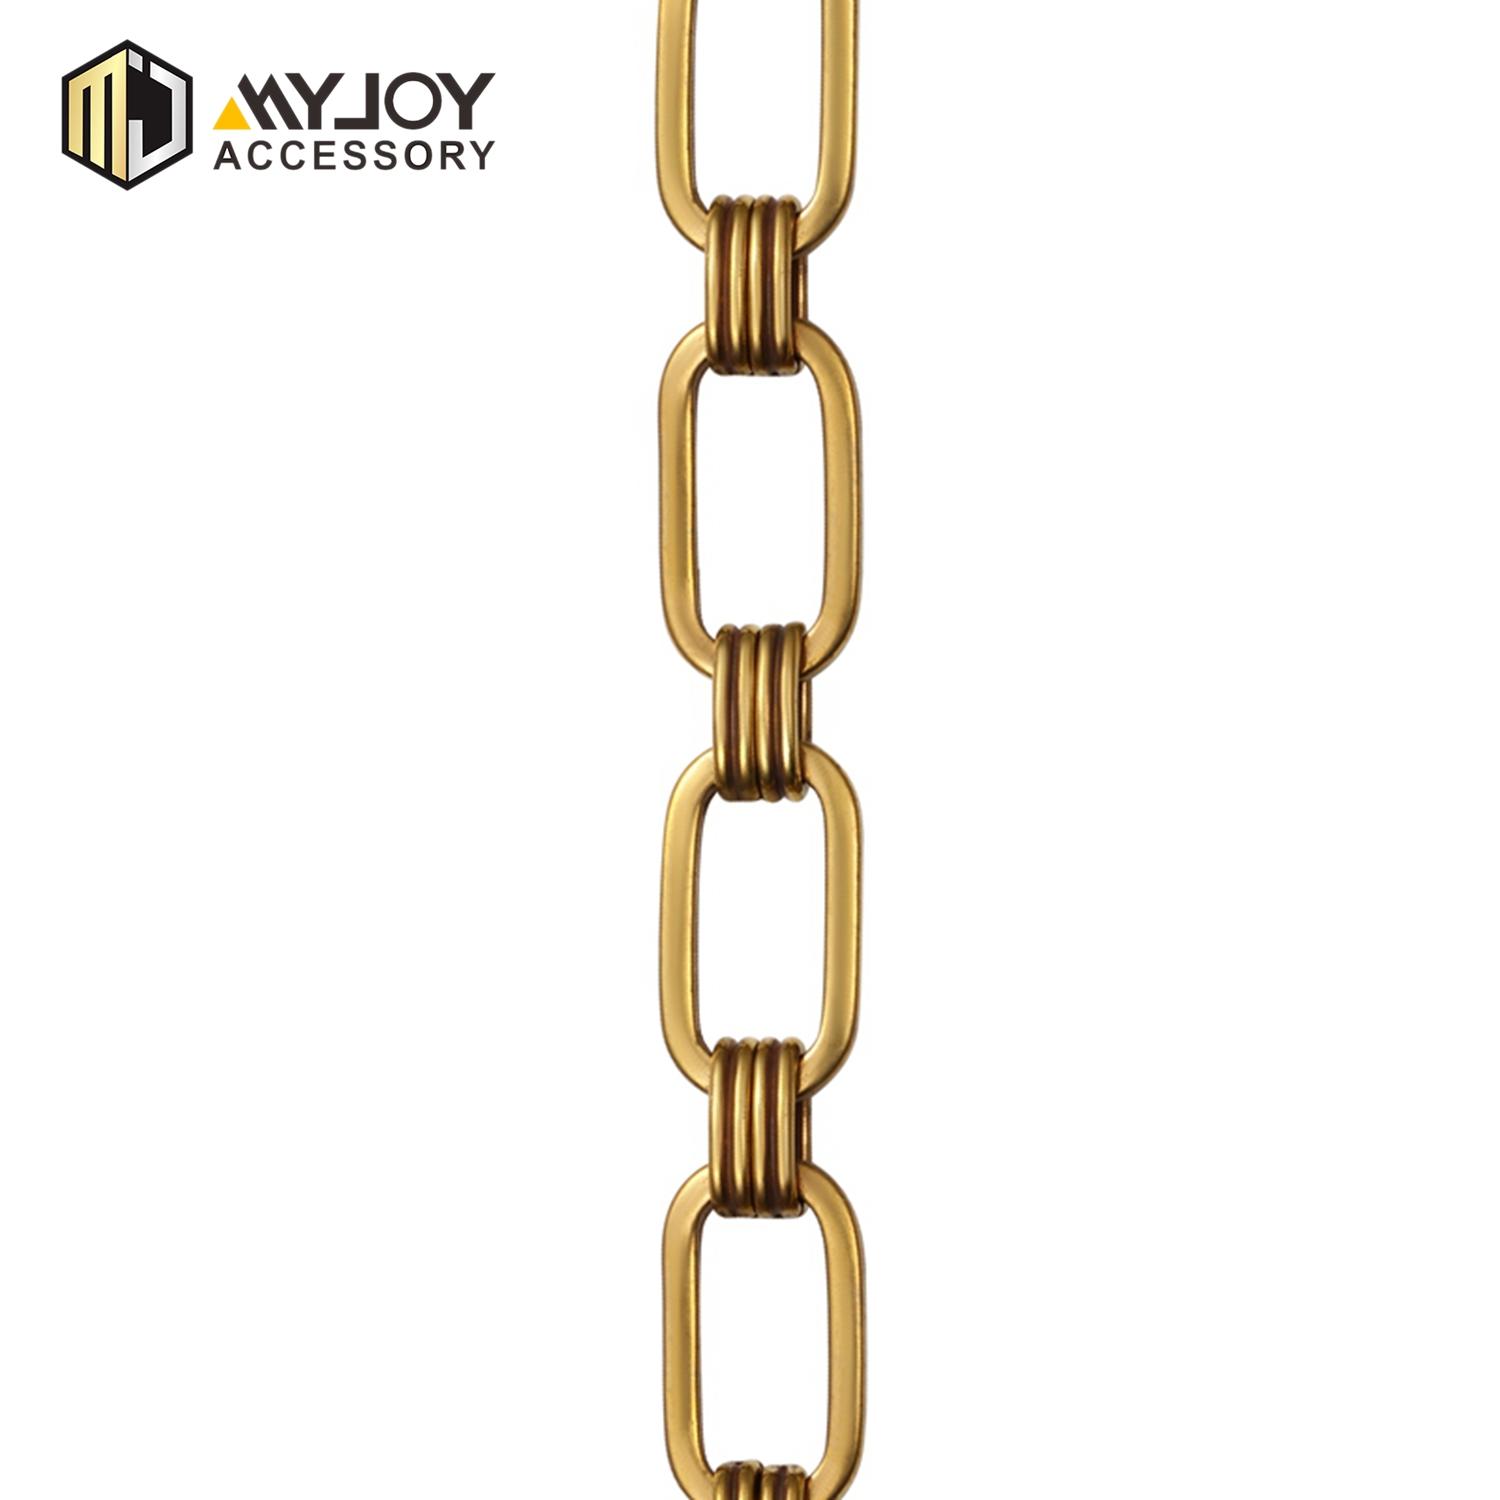 MYJOY High-quality chain strap supply for bags